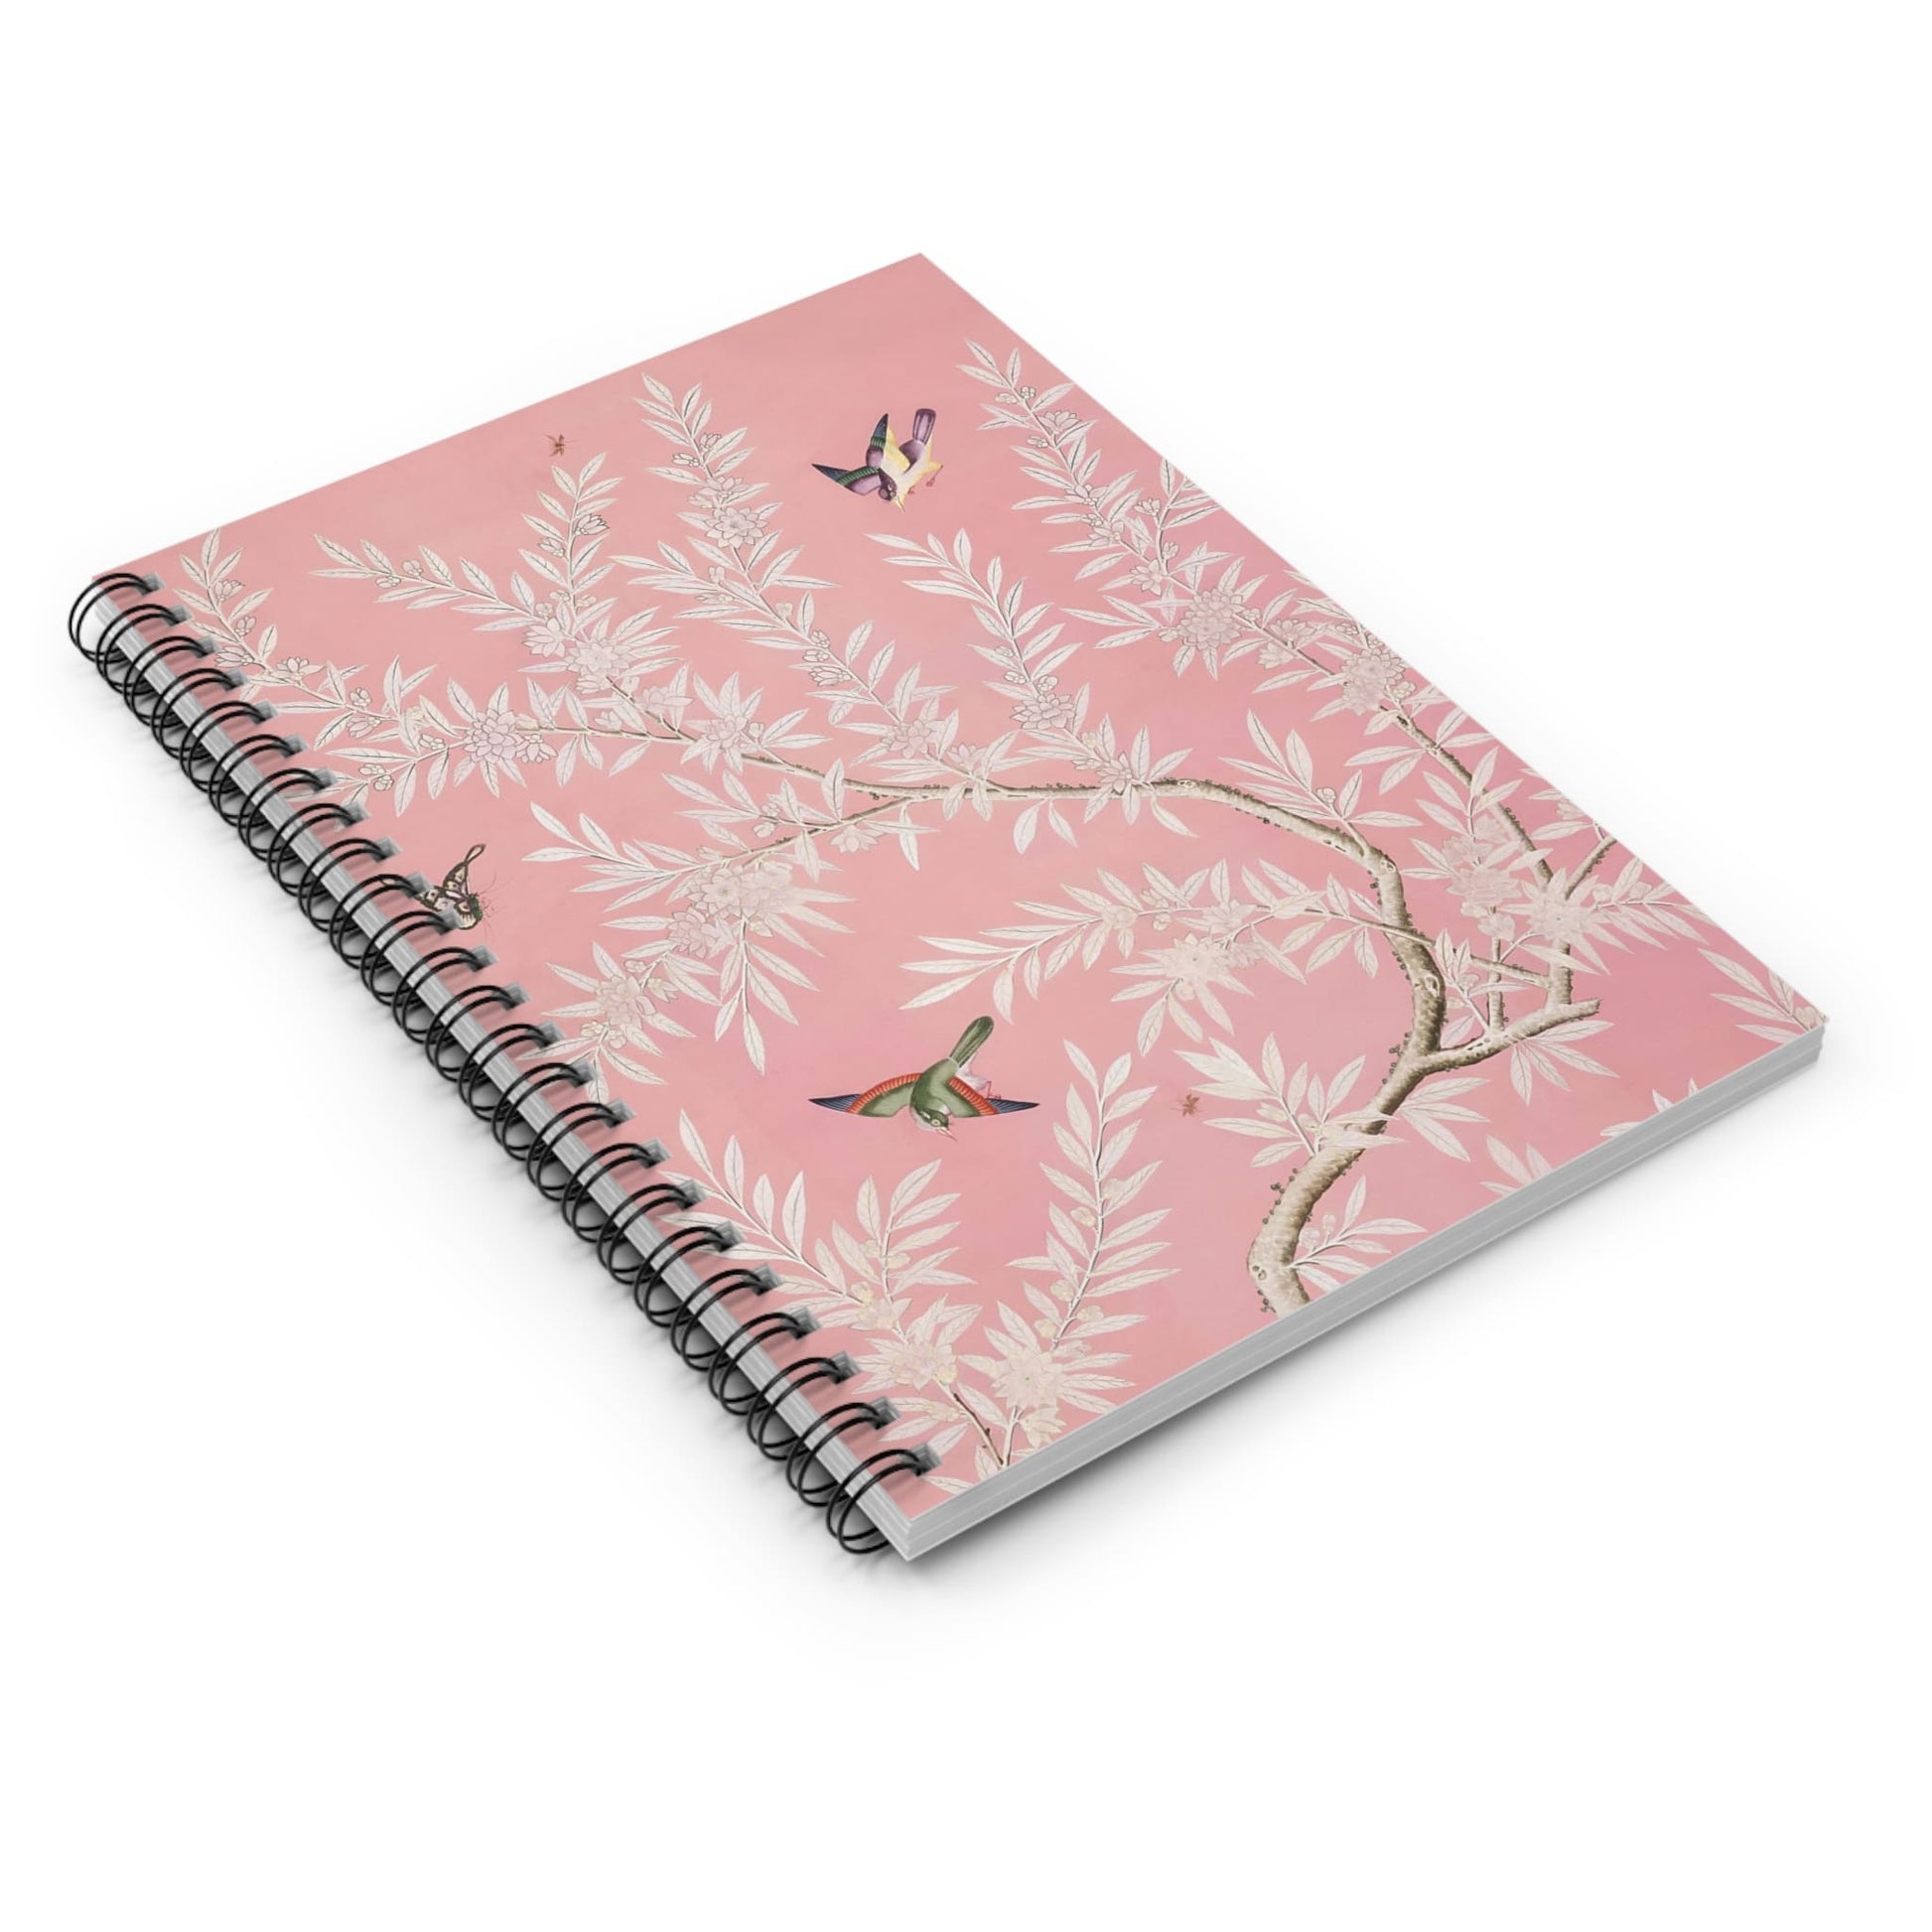 Pink Floral Spiral Notebook Laying Flat on White Surface